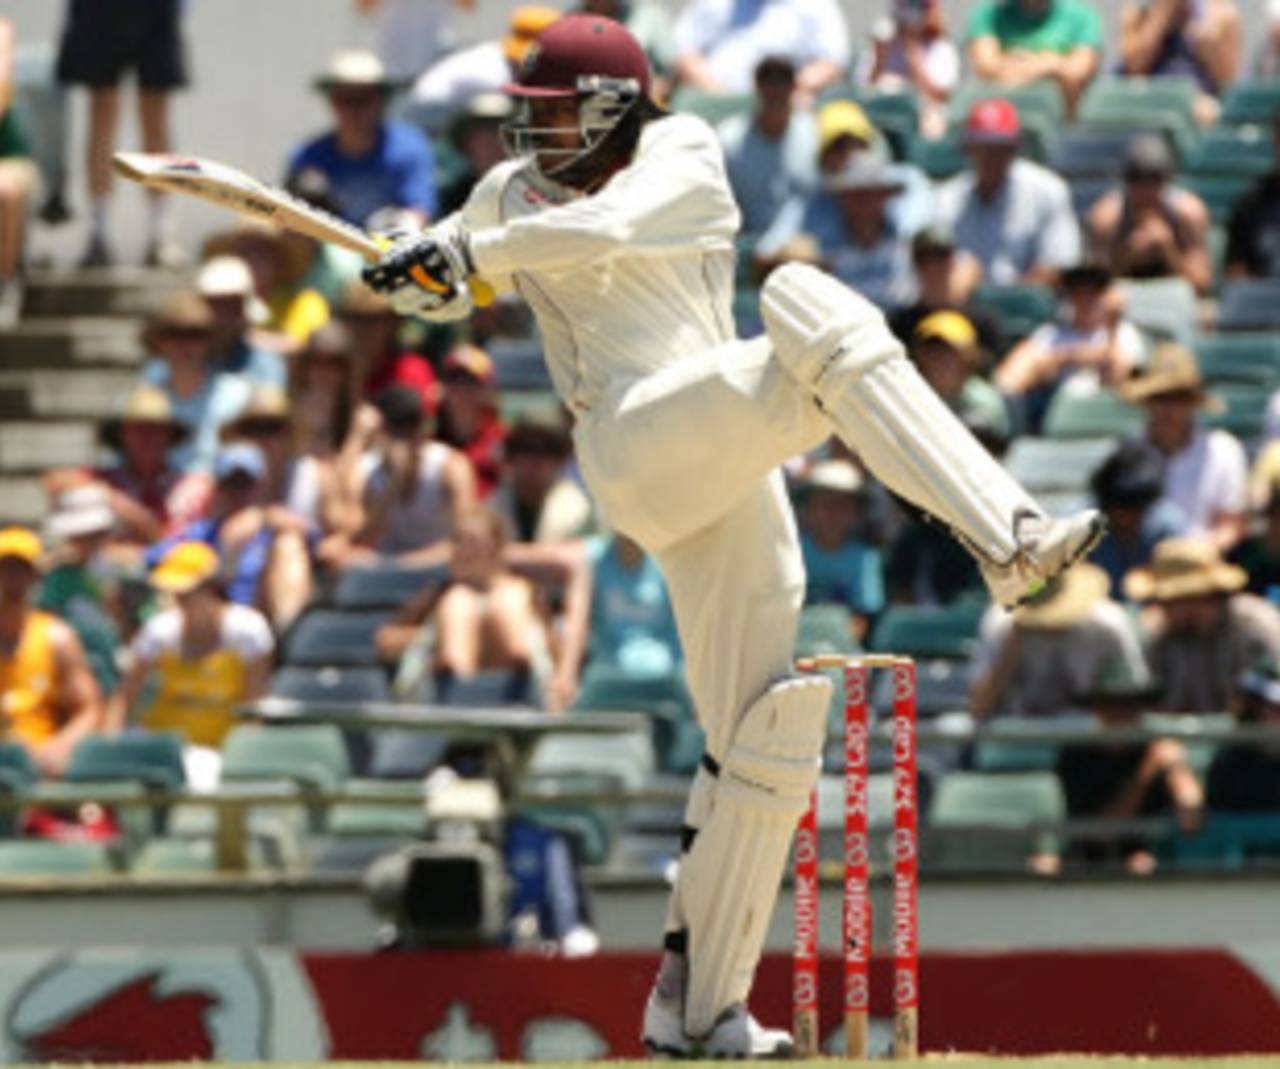 Chris Gayle's outfit has changed significantly to the one that challenged Australia in the Test series&nbsp;&nbsp;&bull;&nbsp;&nbsp;Getty Images